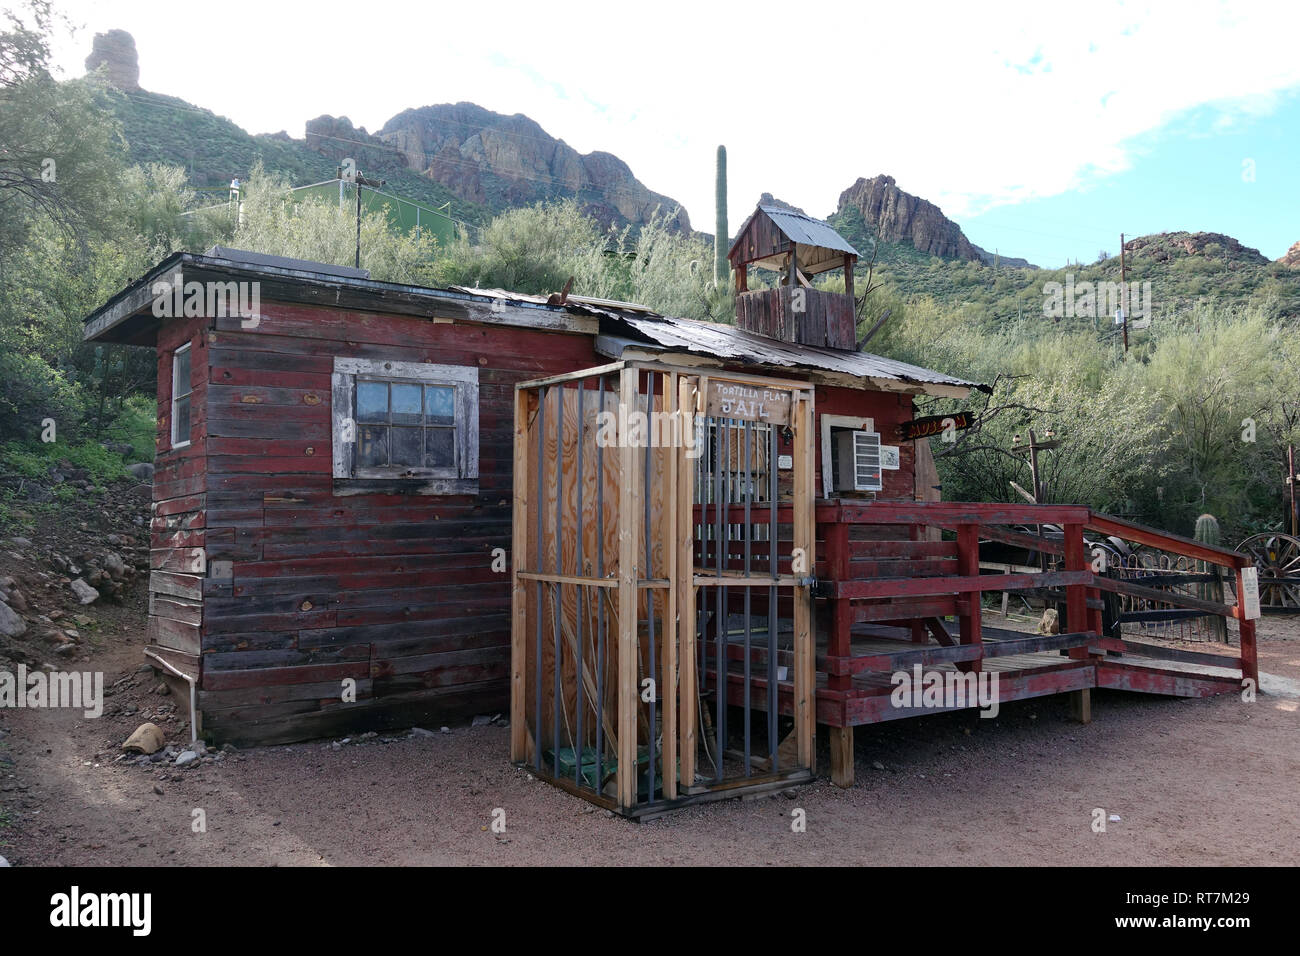 A small jail cell outside in an old gold mining town called Tortilla Flats, in the Arizona desert. Stock Photo